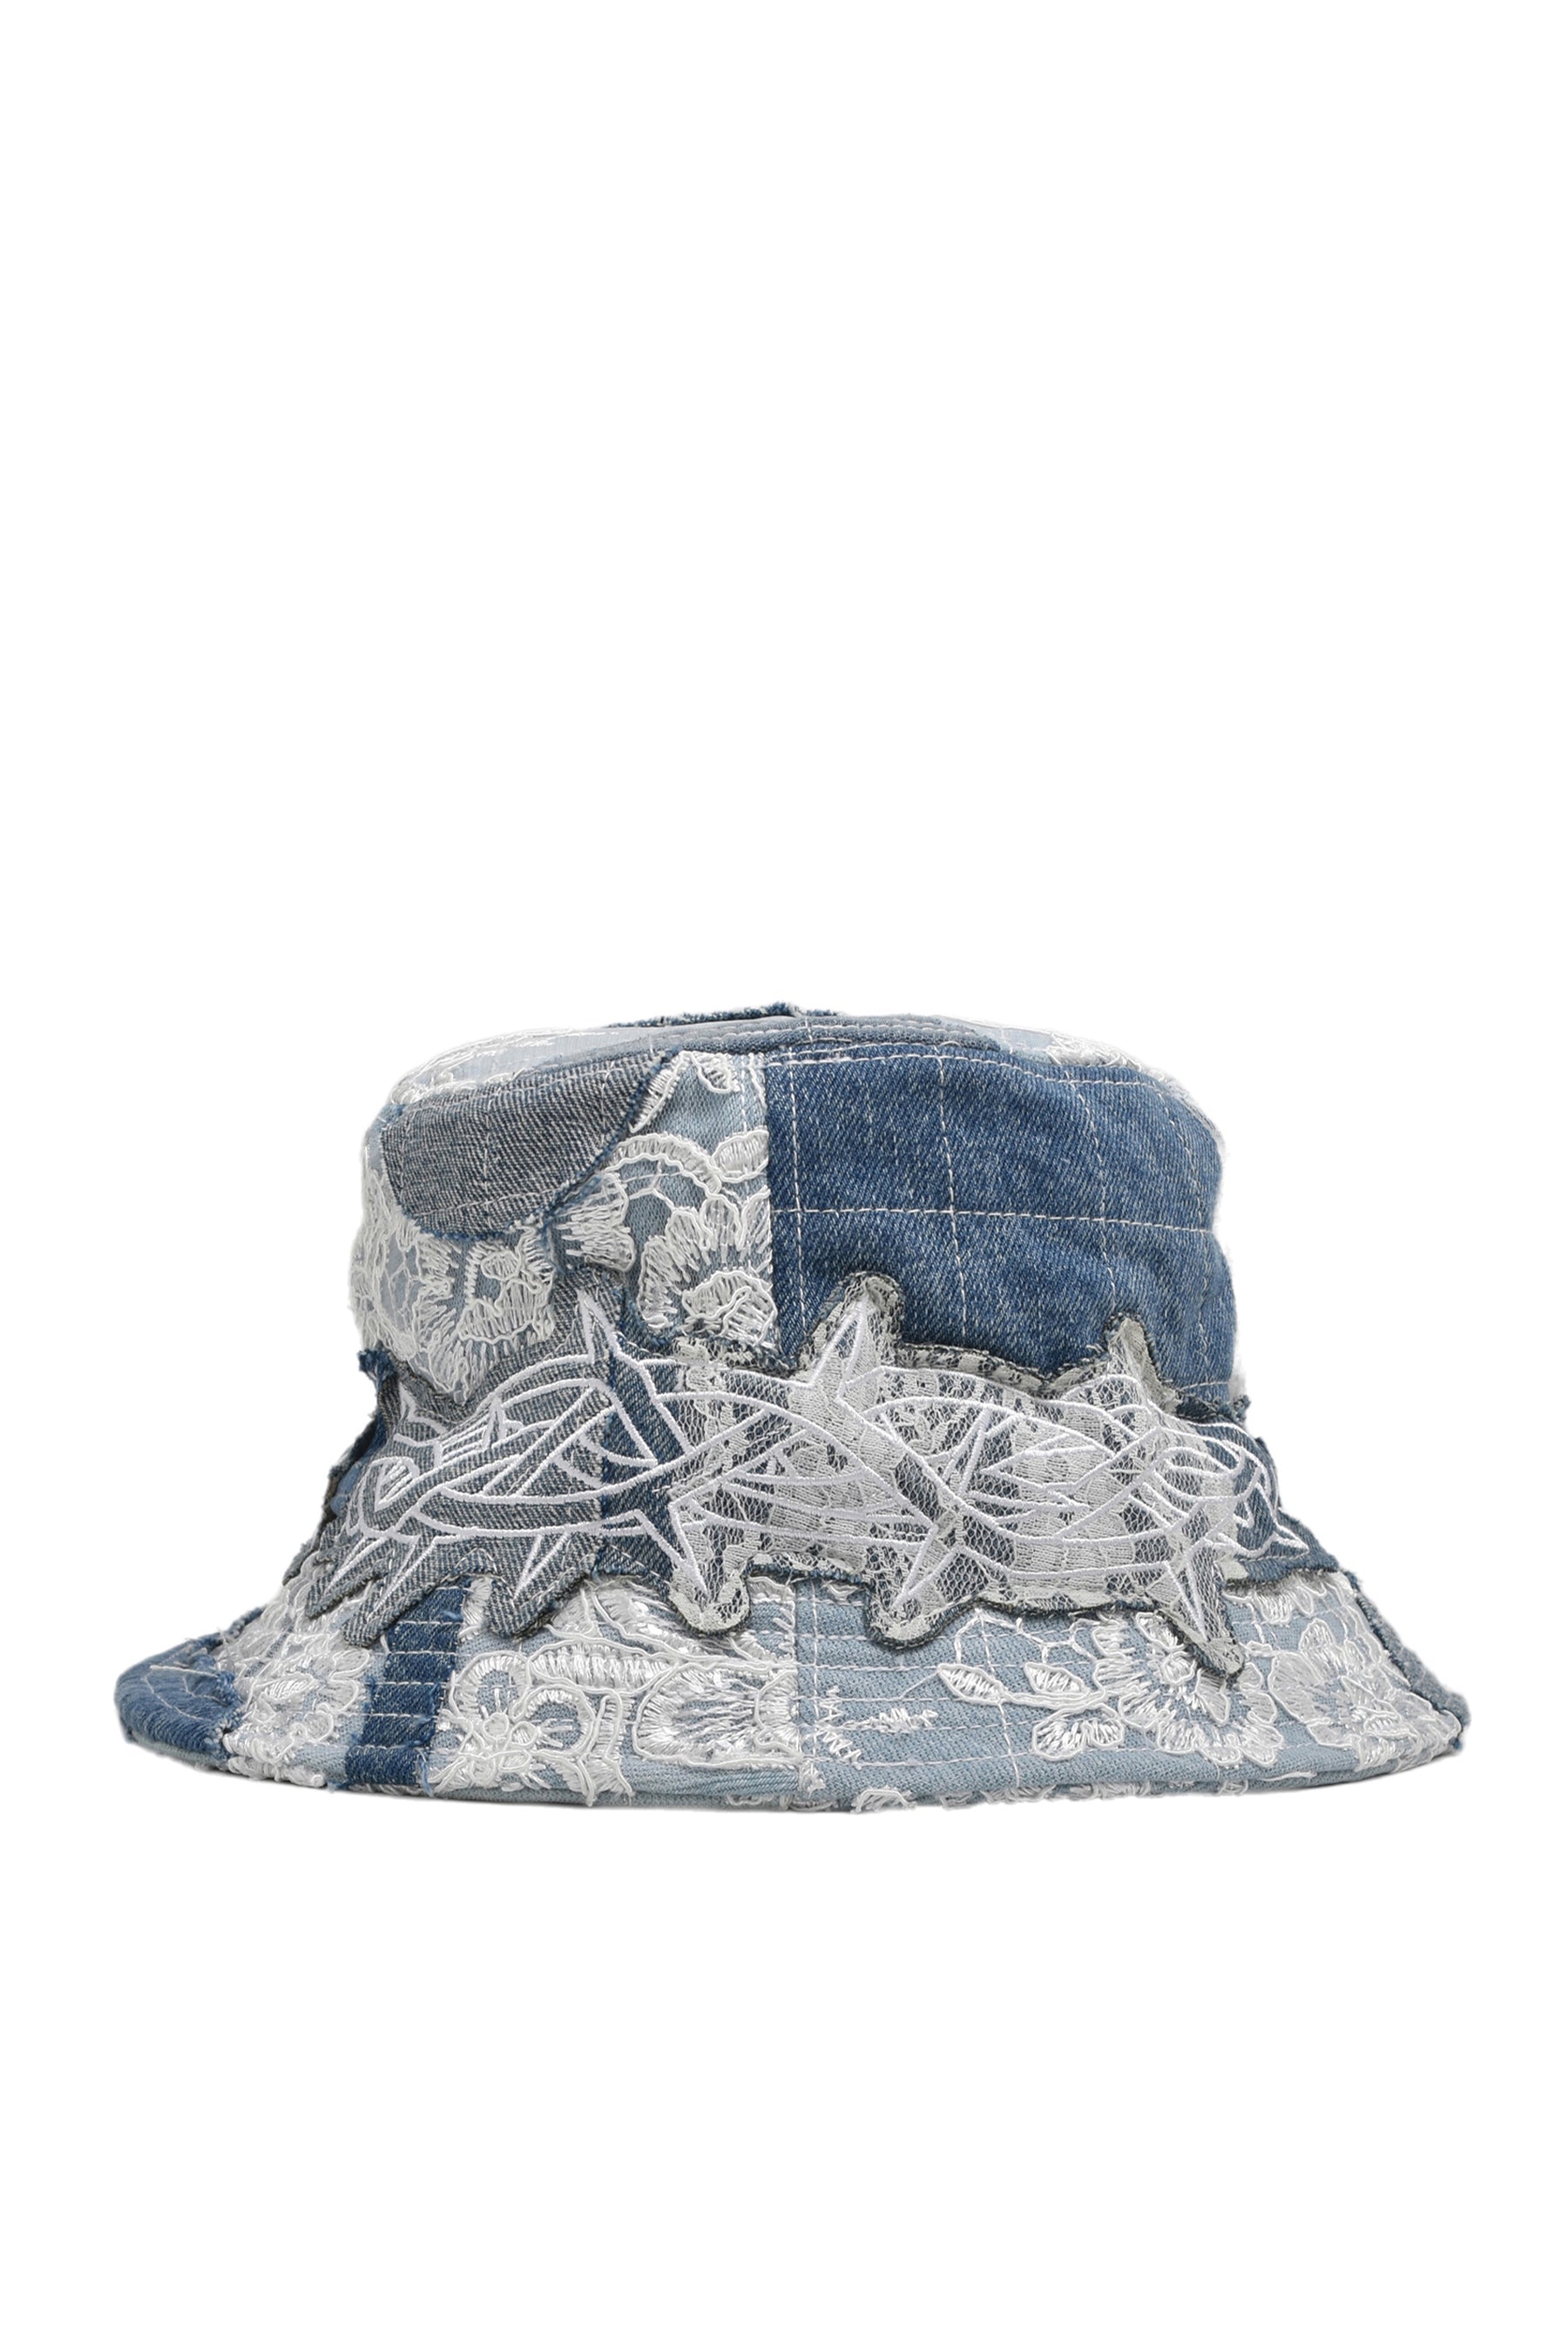 THORN WRAPPED GRID BUCKET HAT / SKY